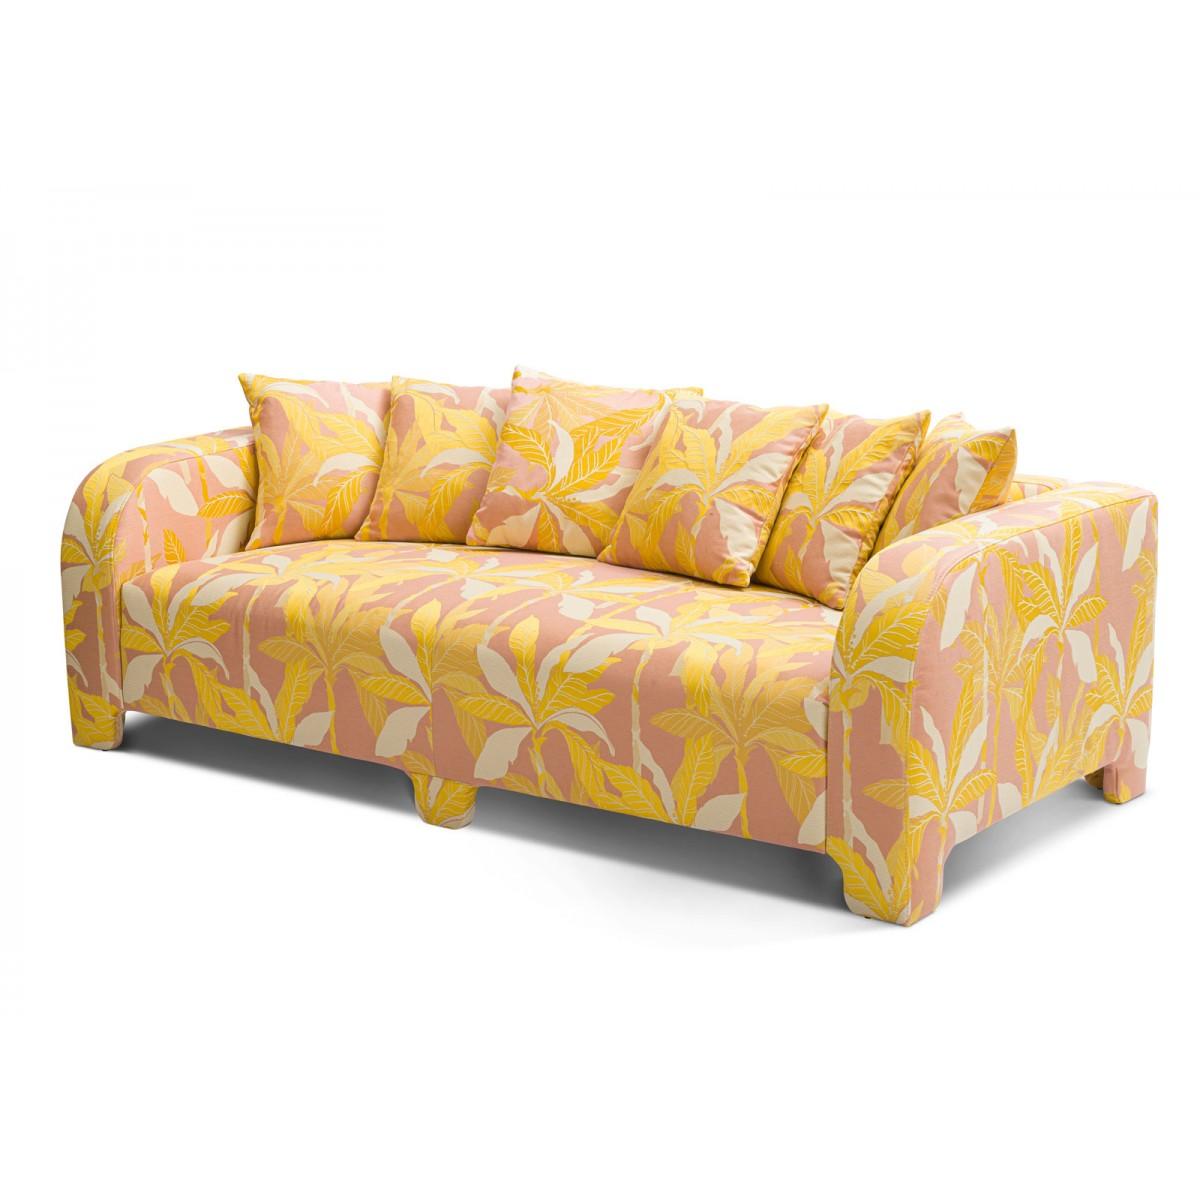 Popus Editions Graziella 3 seater sofa in pink Miami jacquard fabric

A foot that hides another. A cushion that hides another. A curve that hides another with contemporary lines and a base like a punctuation mark, this sofa gives pride of place to